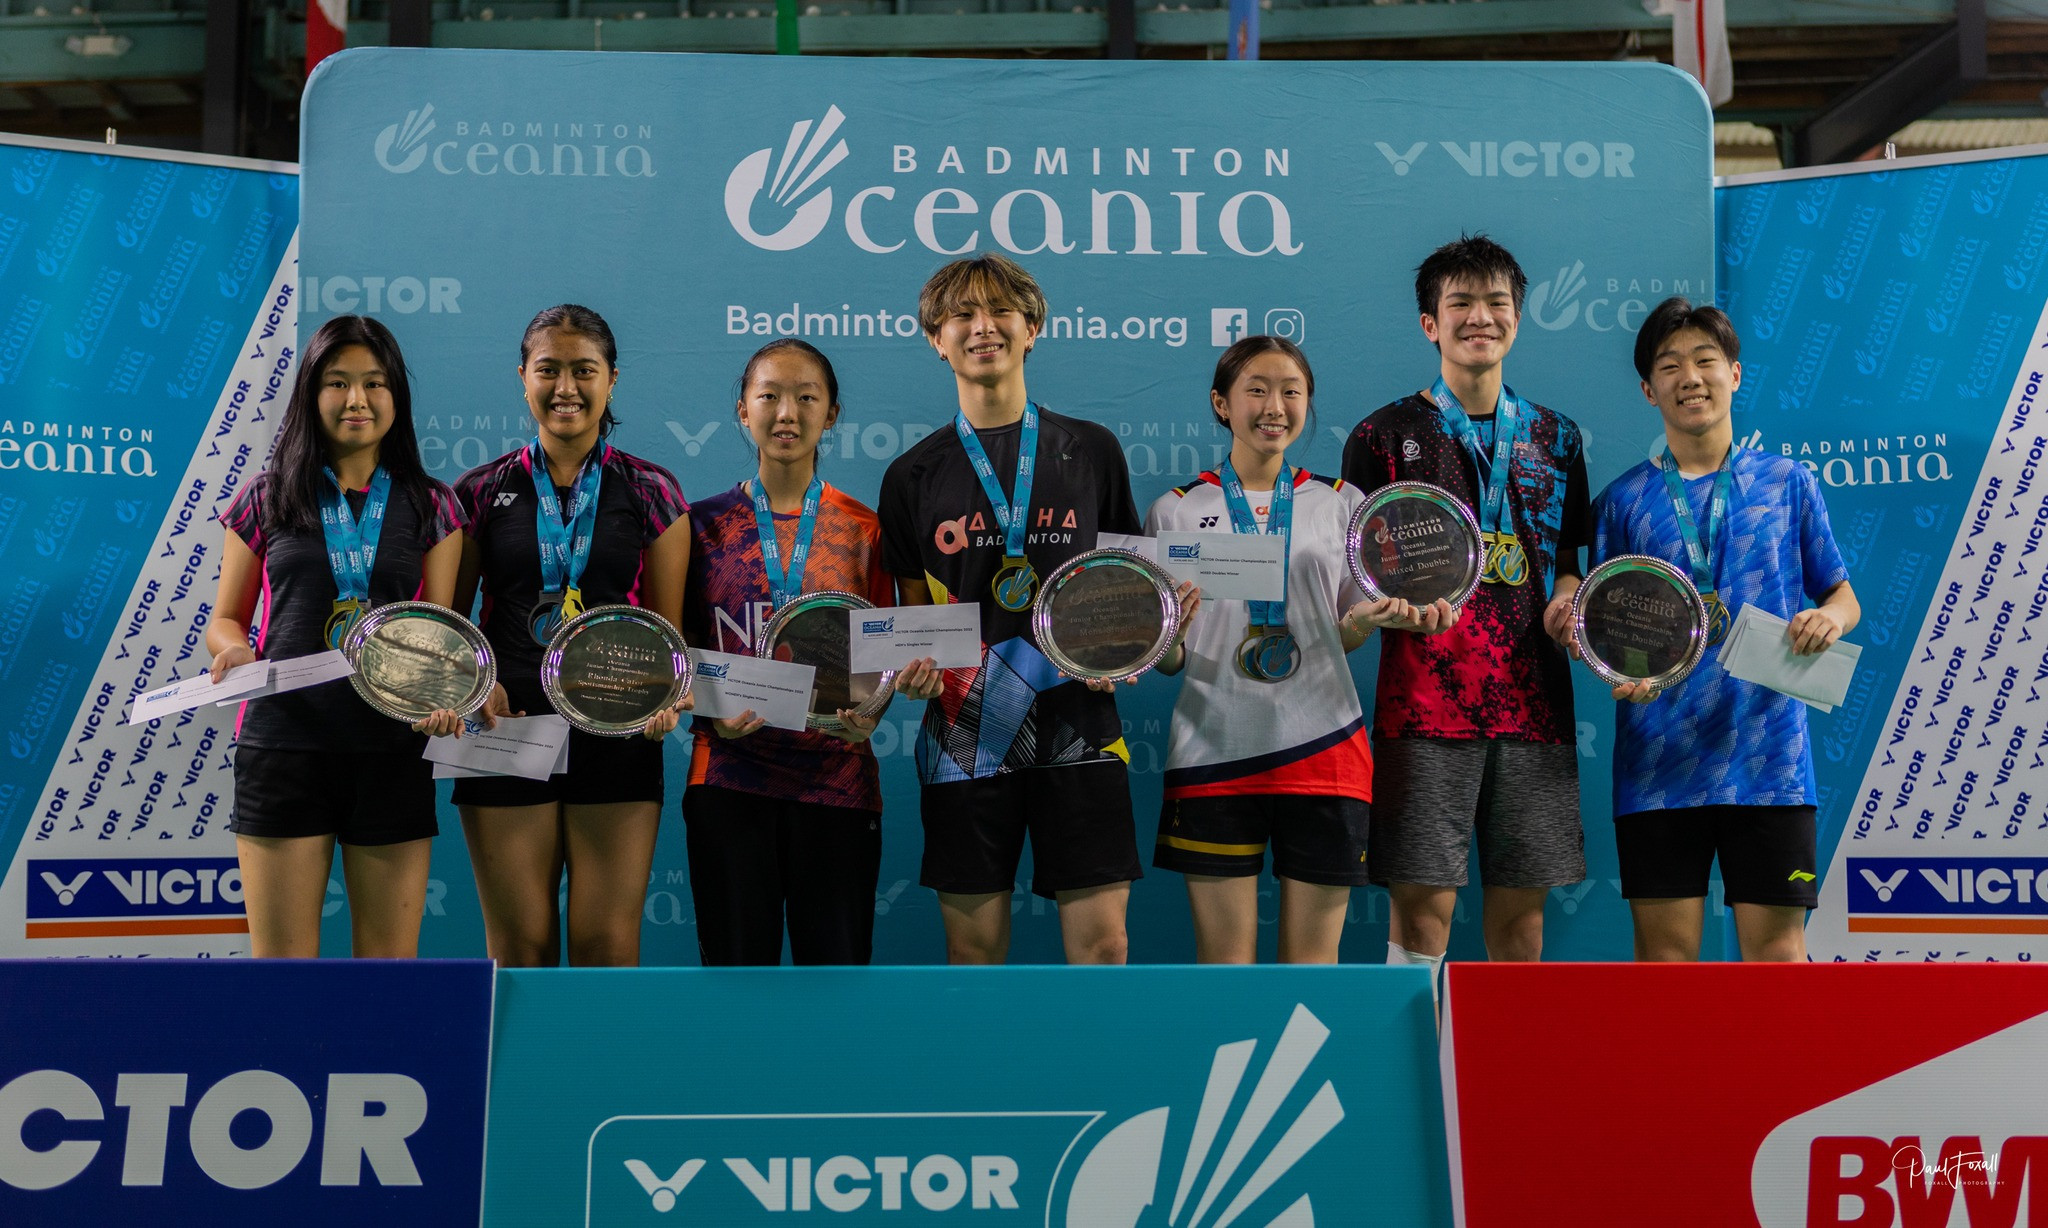 Li and Manota upset the odds for Oceania Badminton Championships gold medals